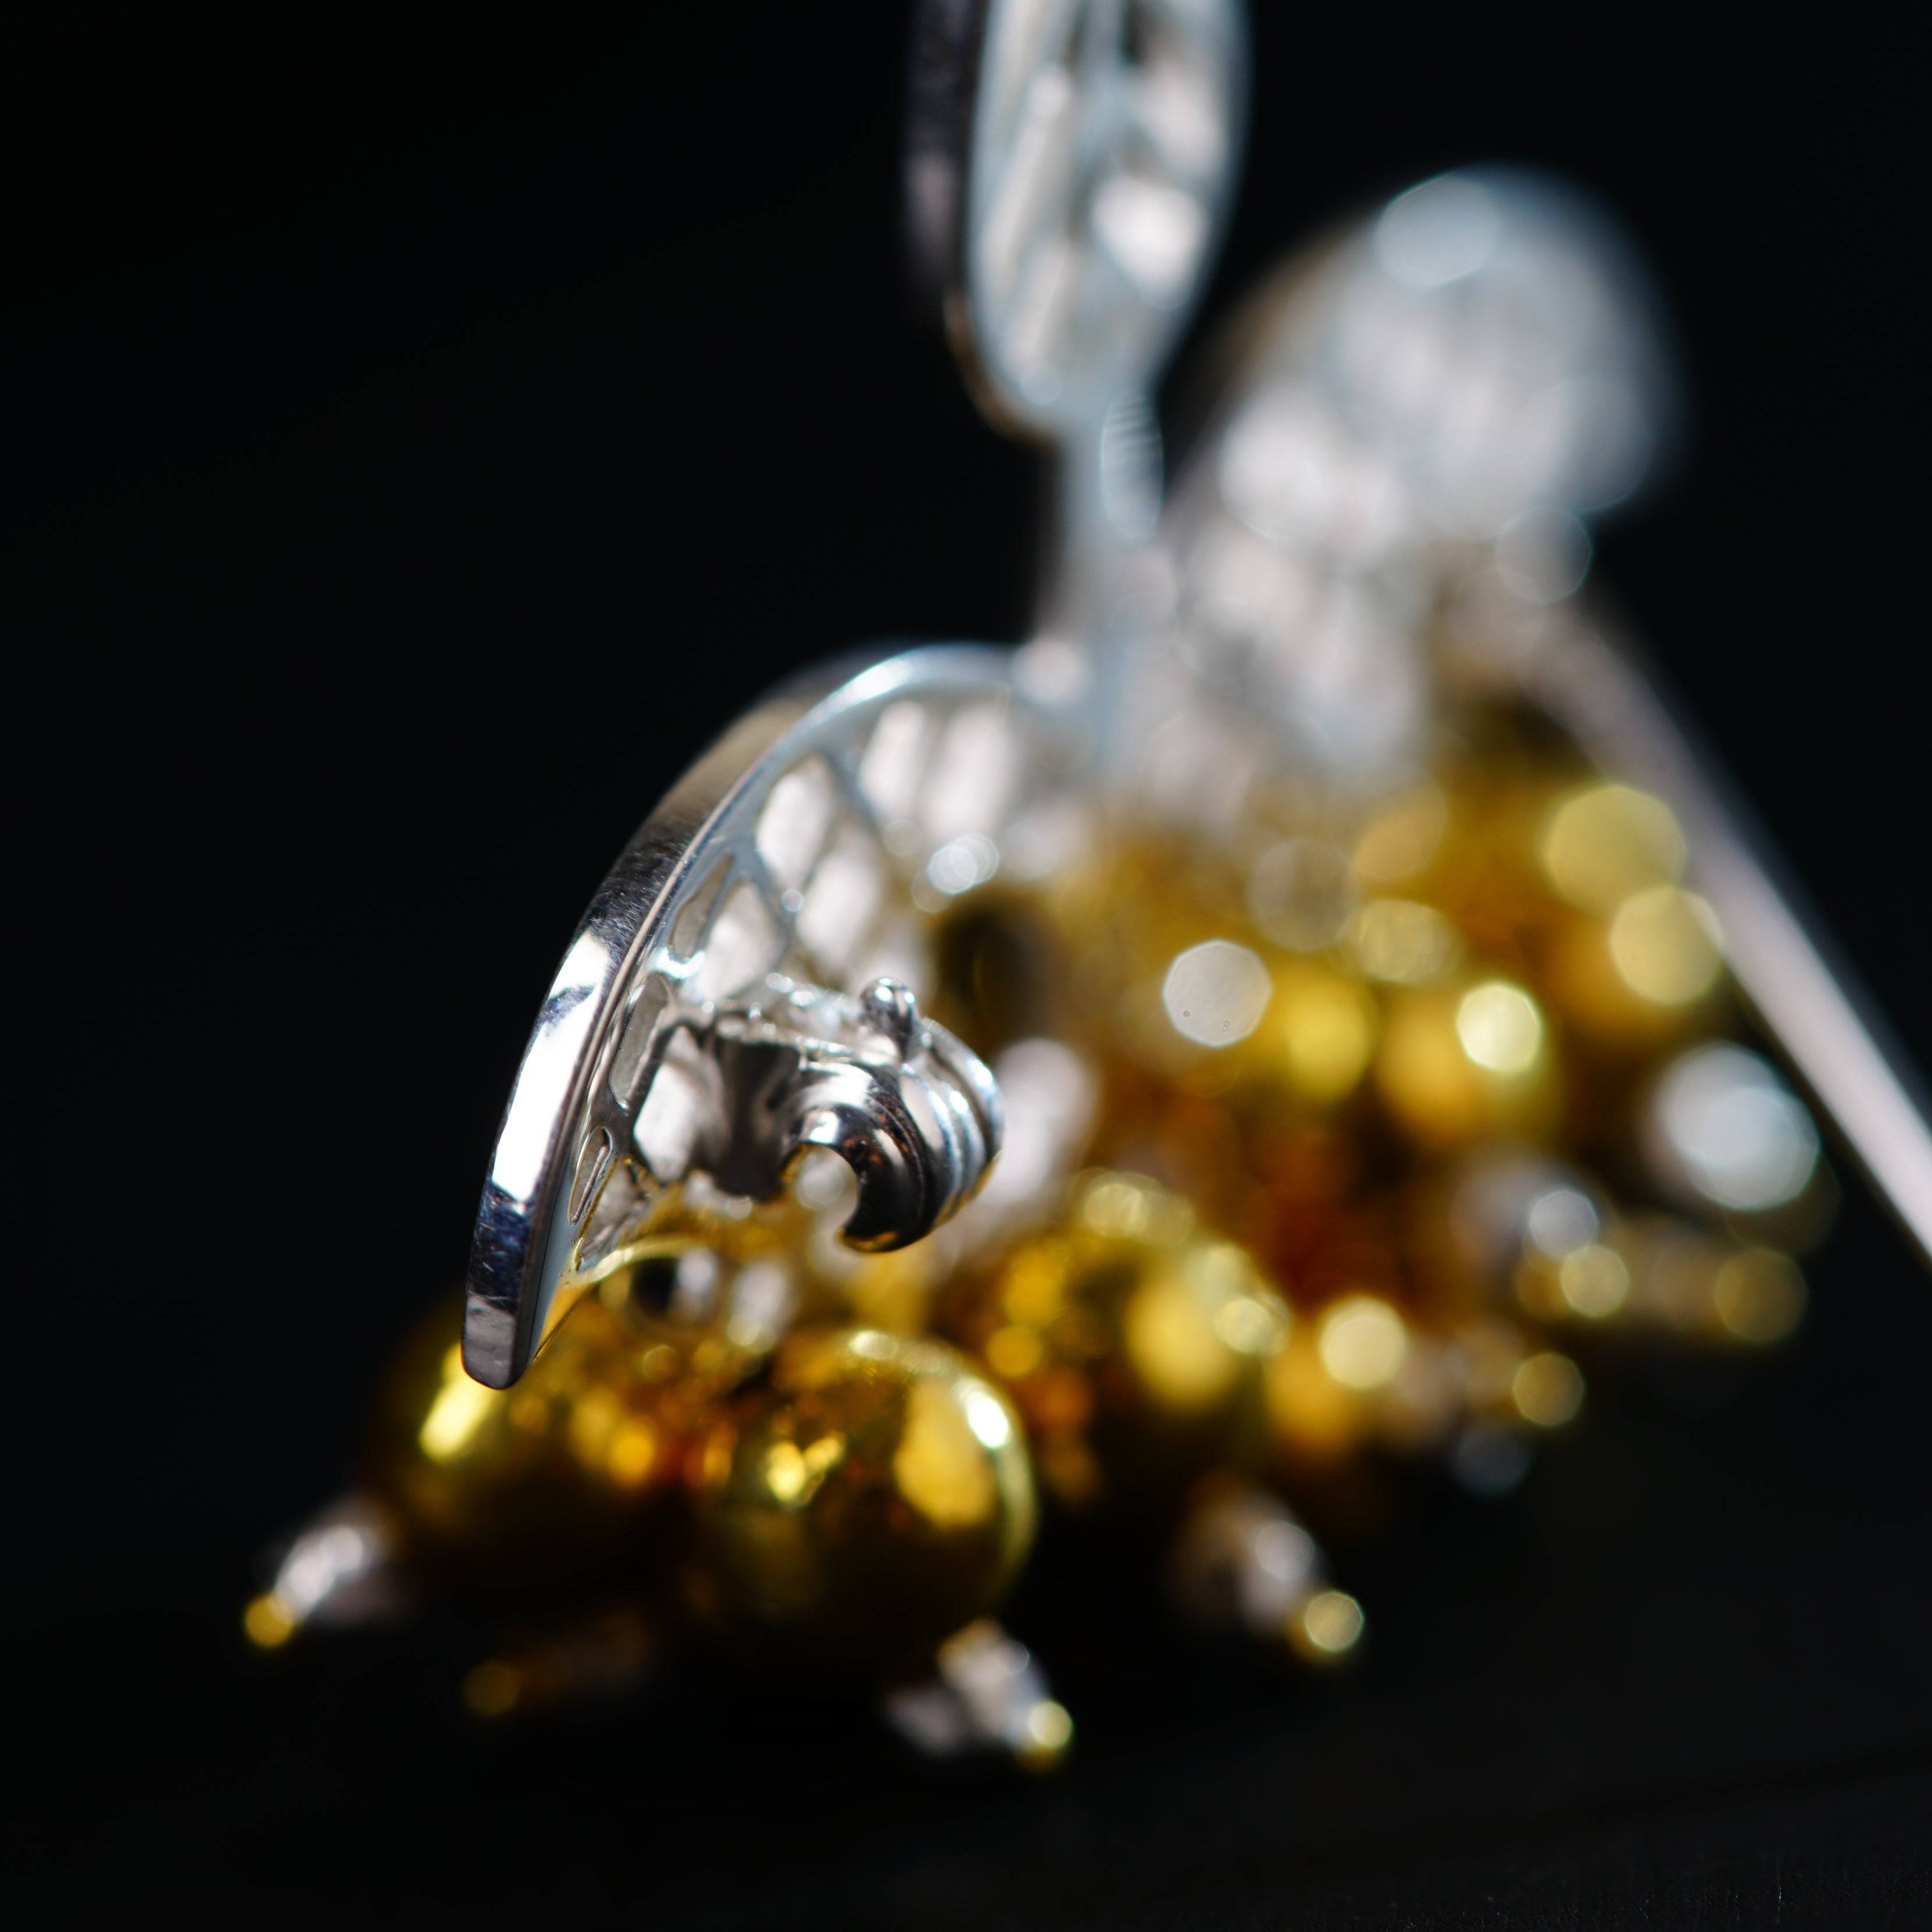 a close up of a metal object with gold balls